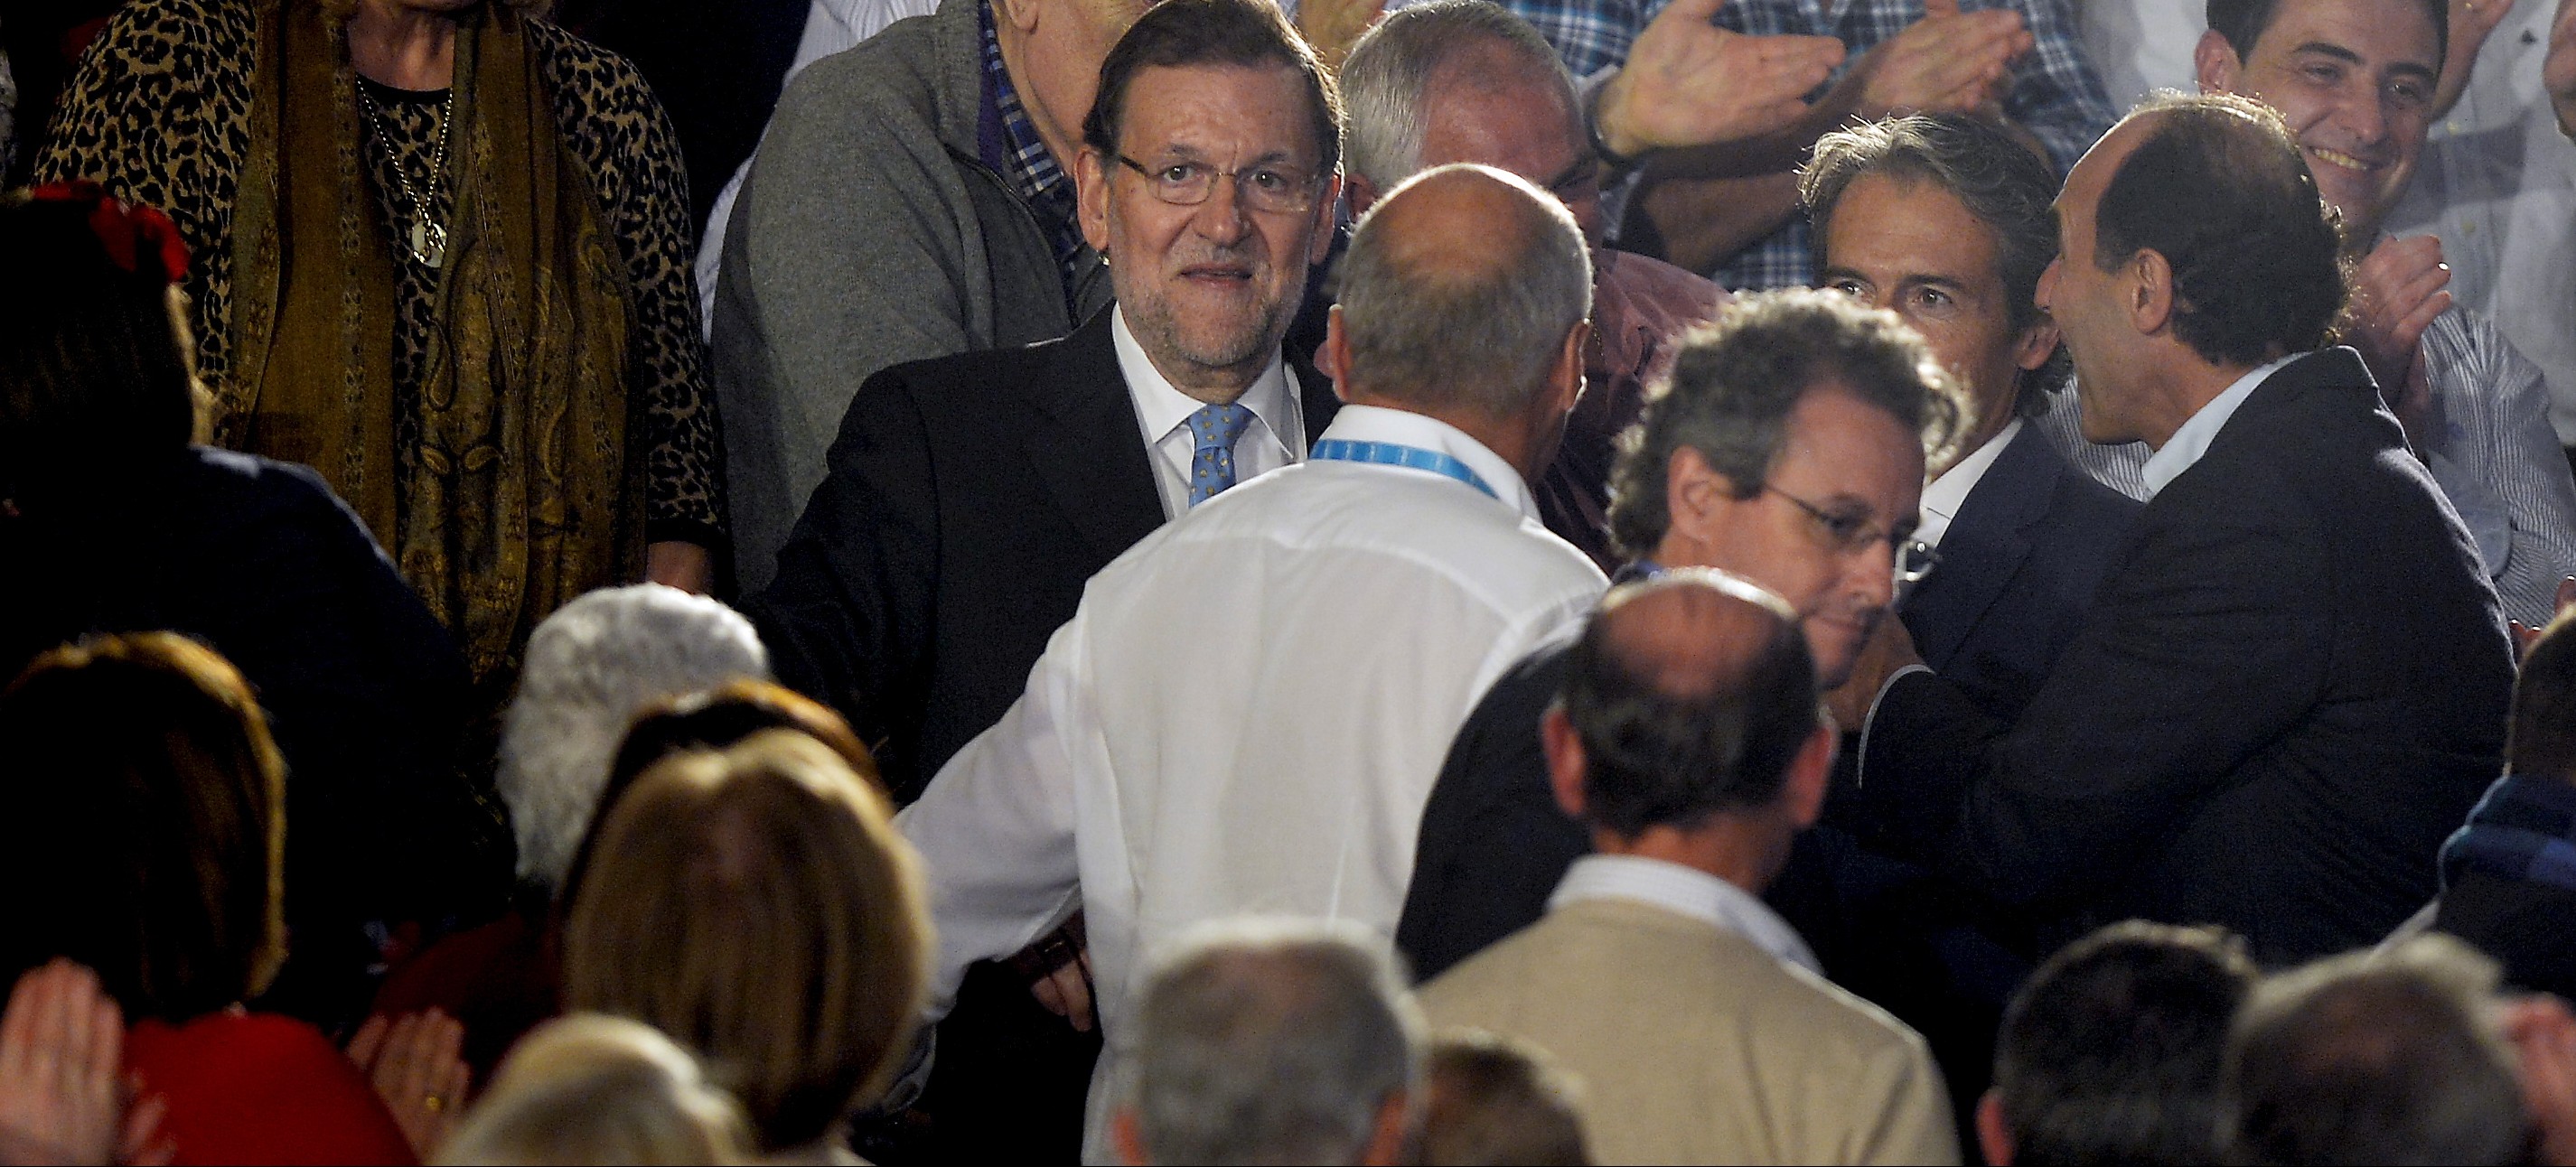 Spanish Prime Minister Mariano Rajoy, one of the four leading candidates for Spain's general election, arrives to a campaign rally in Santander, Spain, December 15, 2015. REUTERS/Vincent West - RTX1YUEJ